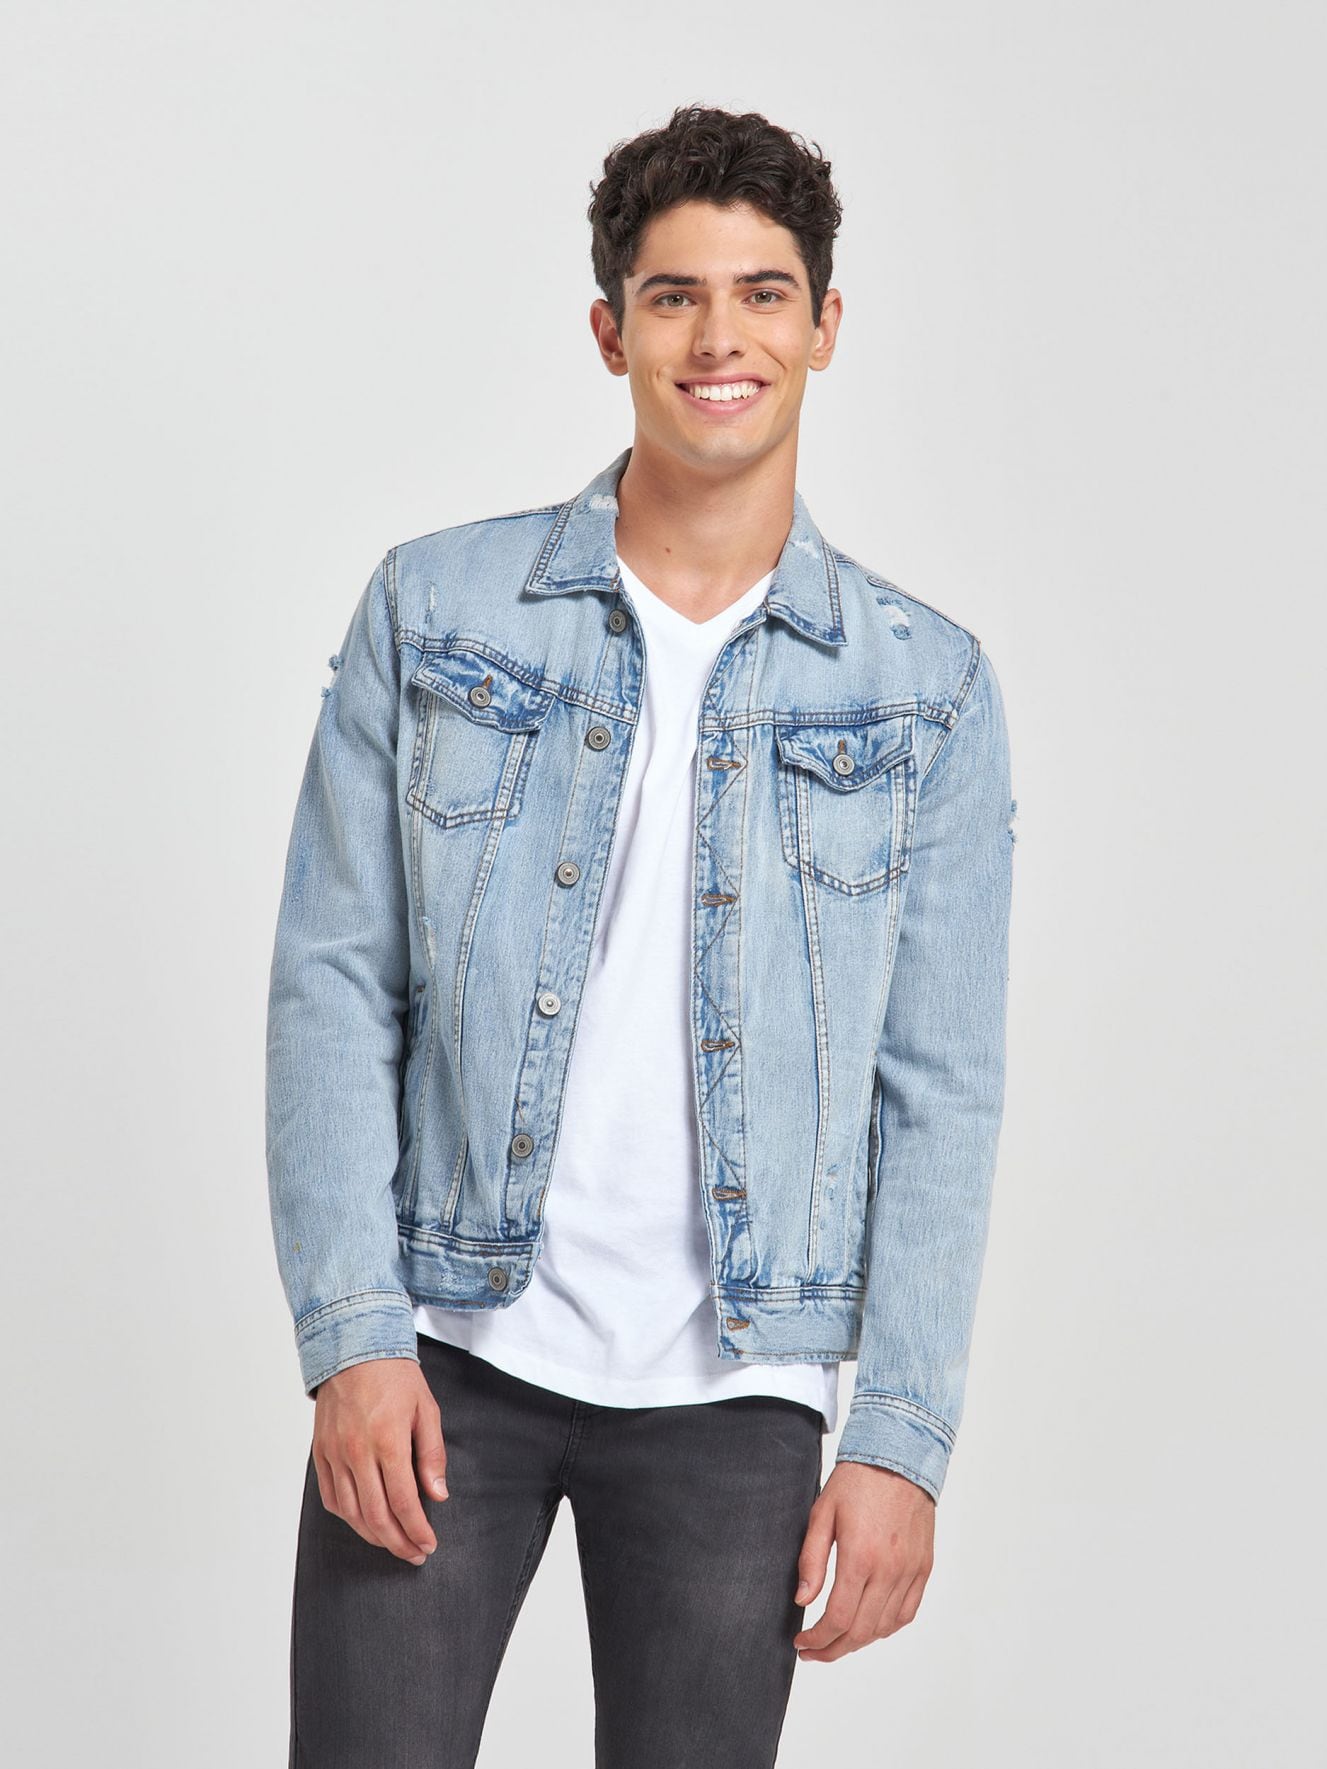 jeans jacket for man